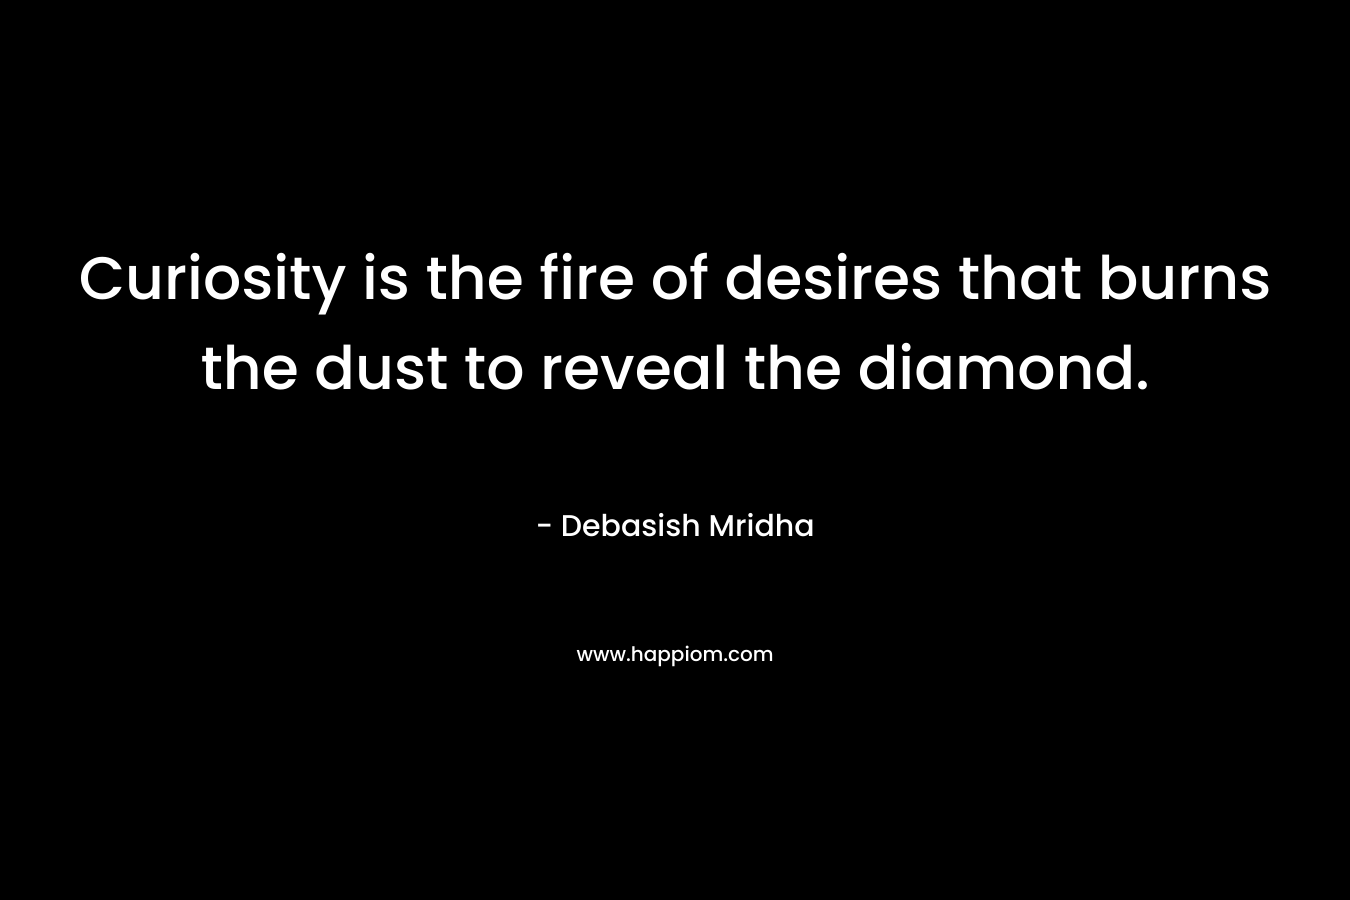 Curiosity is the fire of desires that burns the dust to reveal the diamond. – Debasish Mridha